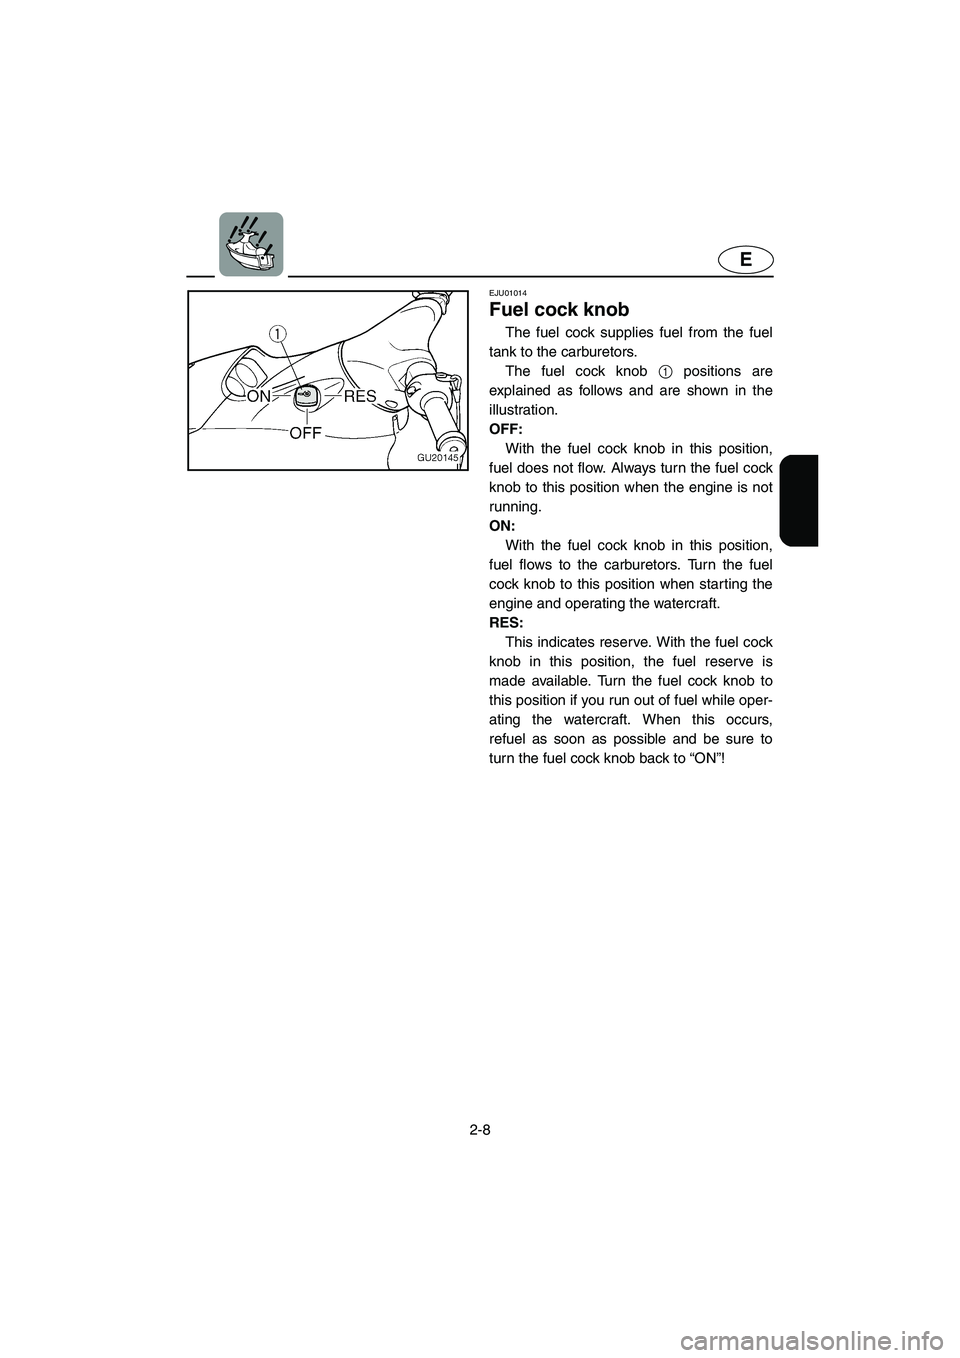 YAMAHA XL 700 2005 Owners Guide 2-8
E
EJU01014 
Fuel cock knob  
The fuel cock supplies fuel from the fuel
tank to the carburetors. 
The fuel cock knob 1 positions are
explained as follows and are shown in the
illustration. 
OFF: 
W